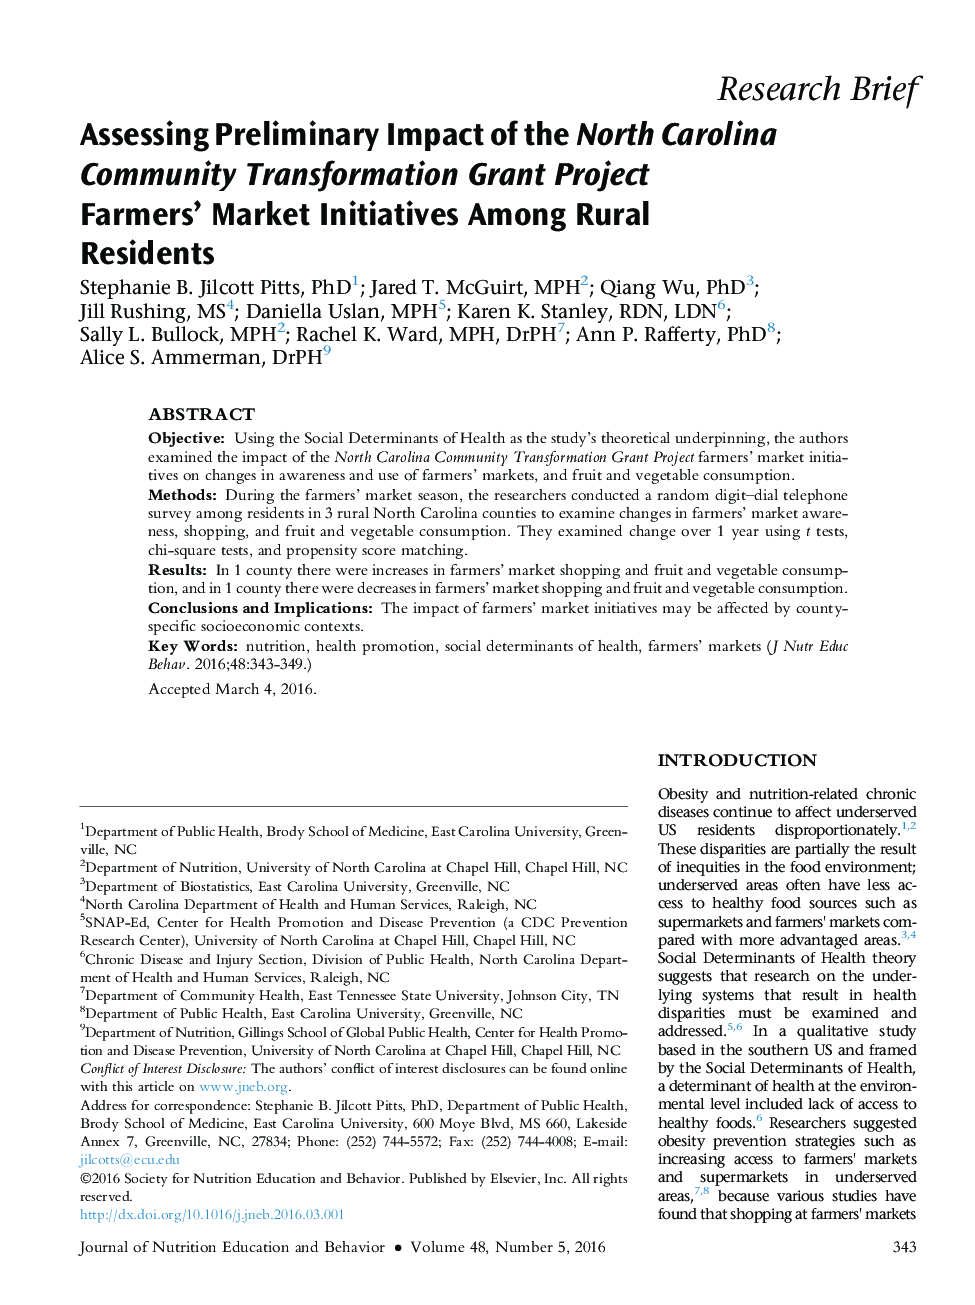 Assessing Preliminary Impact of the North Carolina Community Transformation Grant Project Farmers'Â Market Initiatives Among Rural Residents